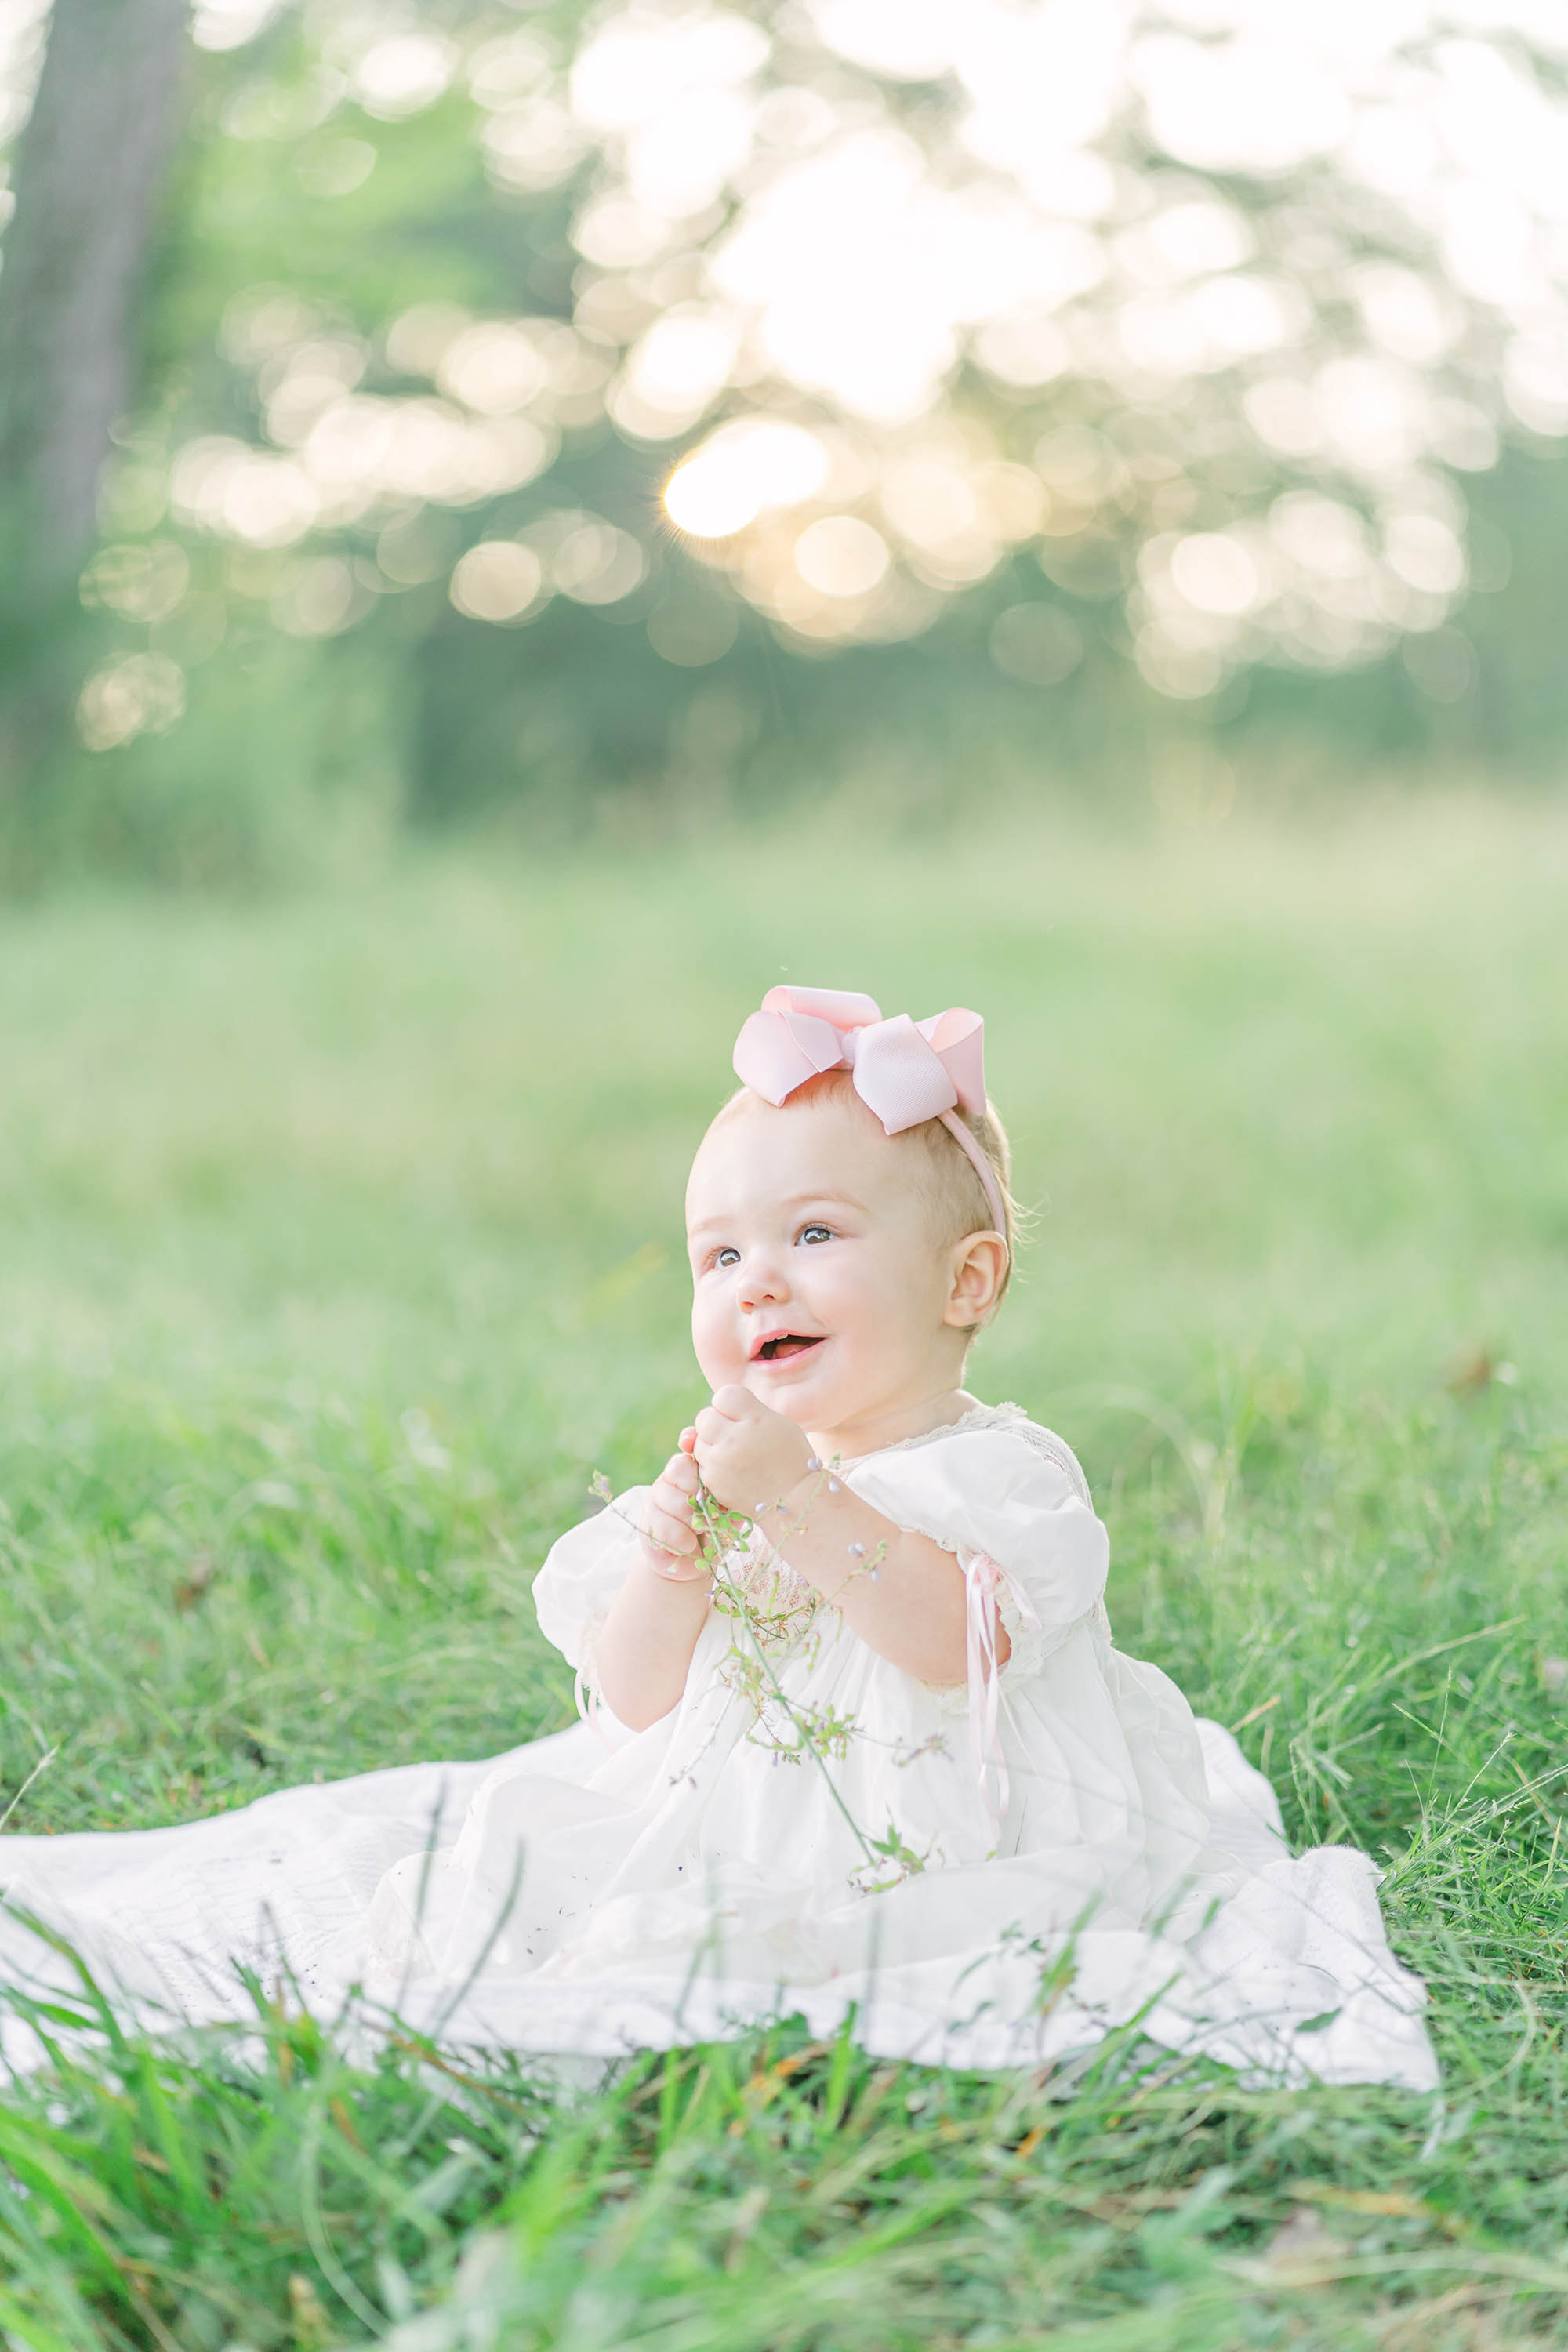 1 year old girl wearing a long white dress sitting in green grass and smiling happily